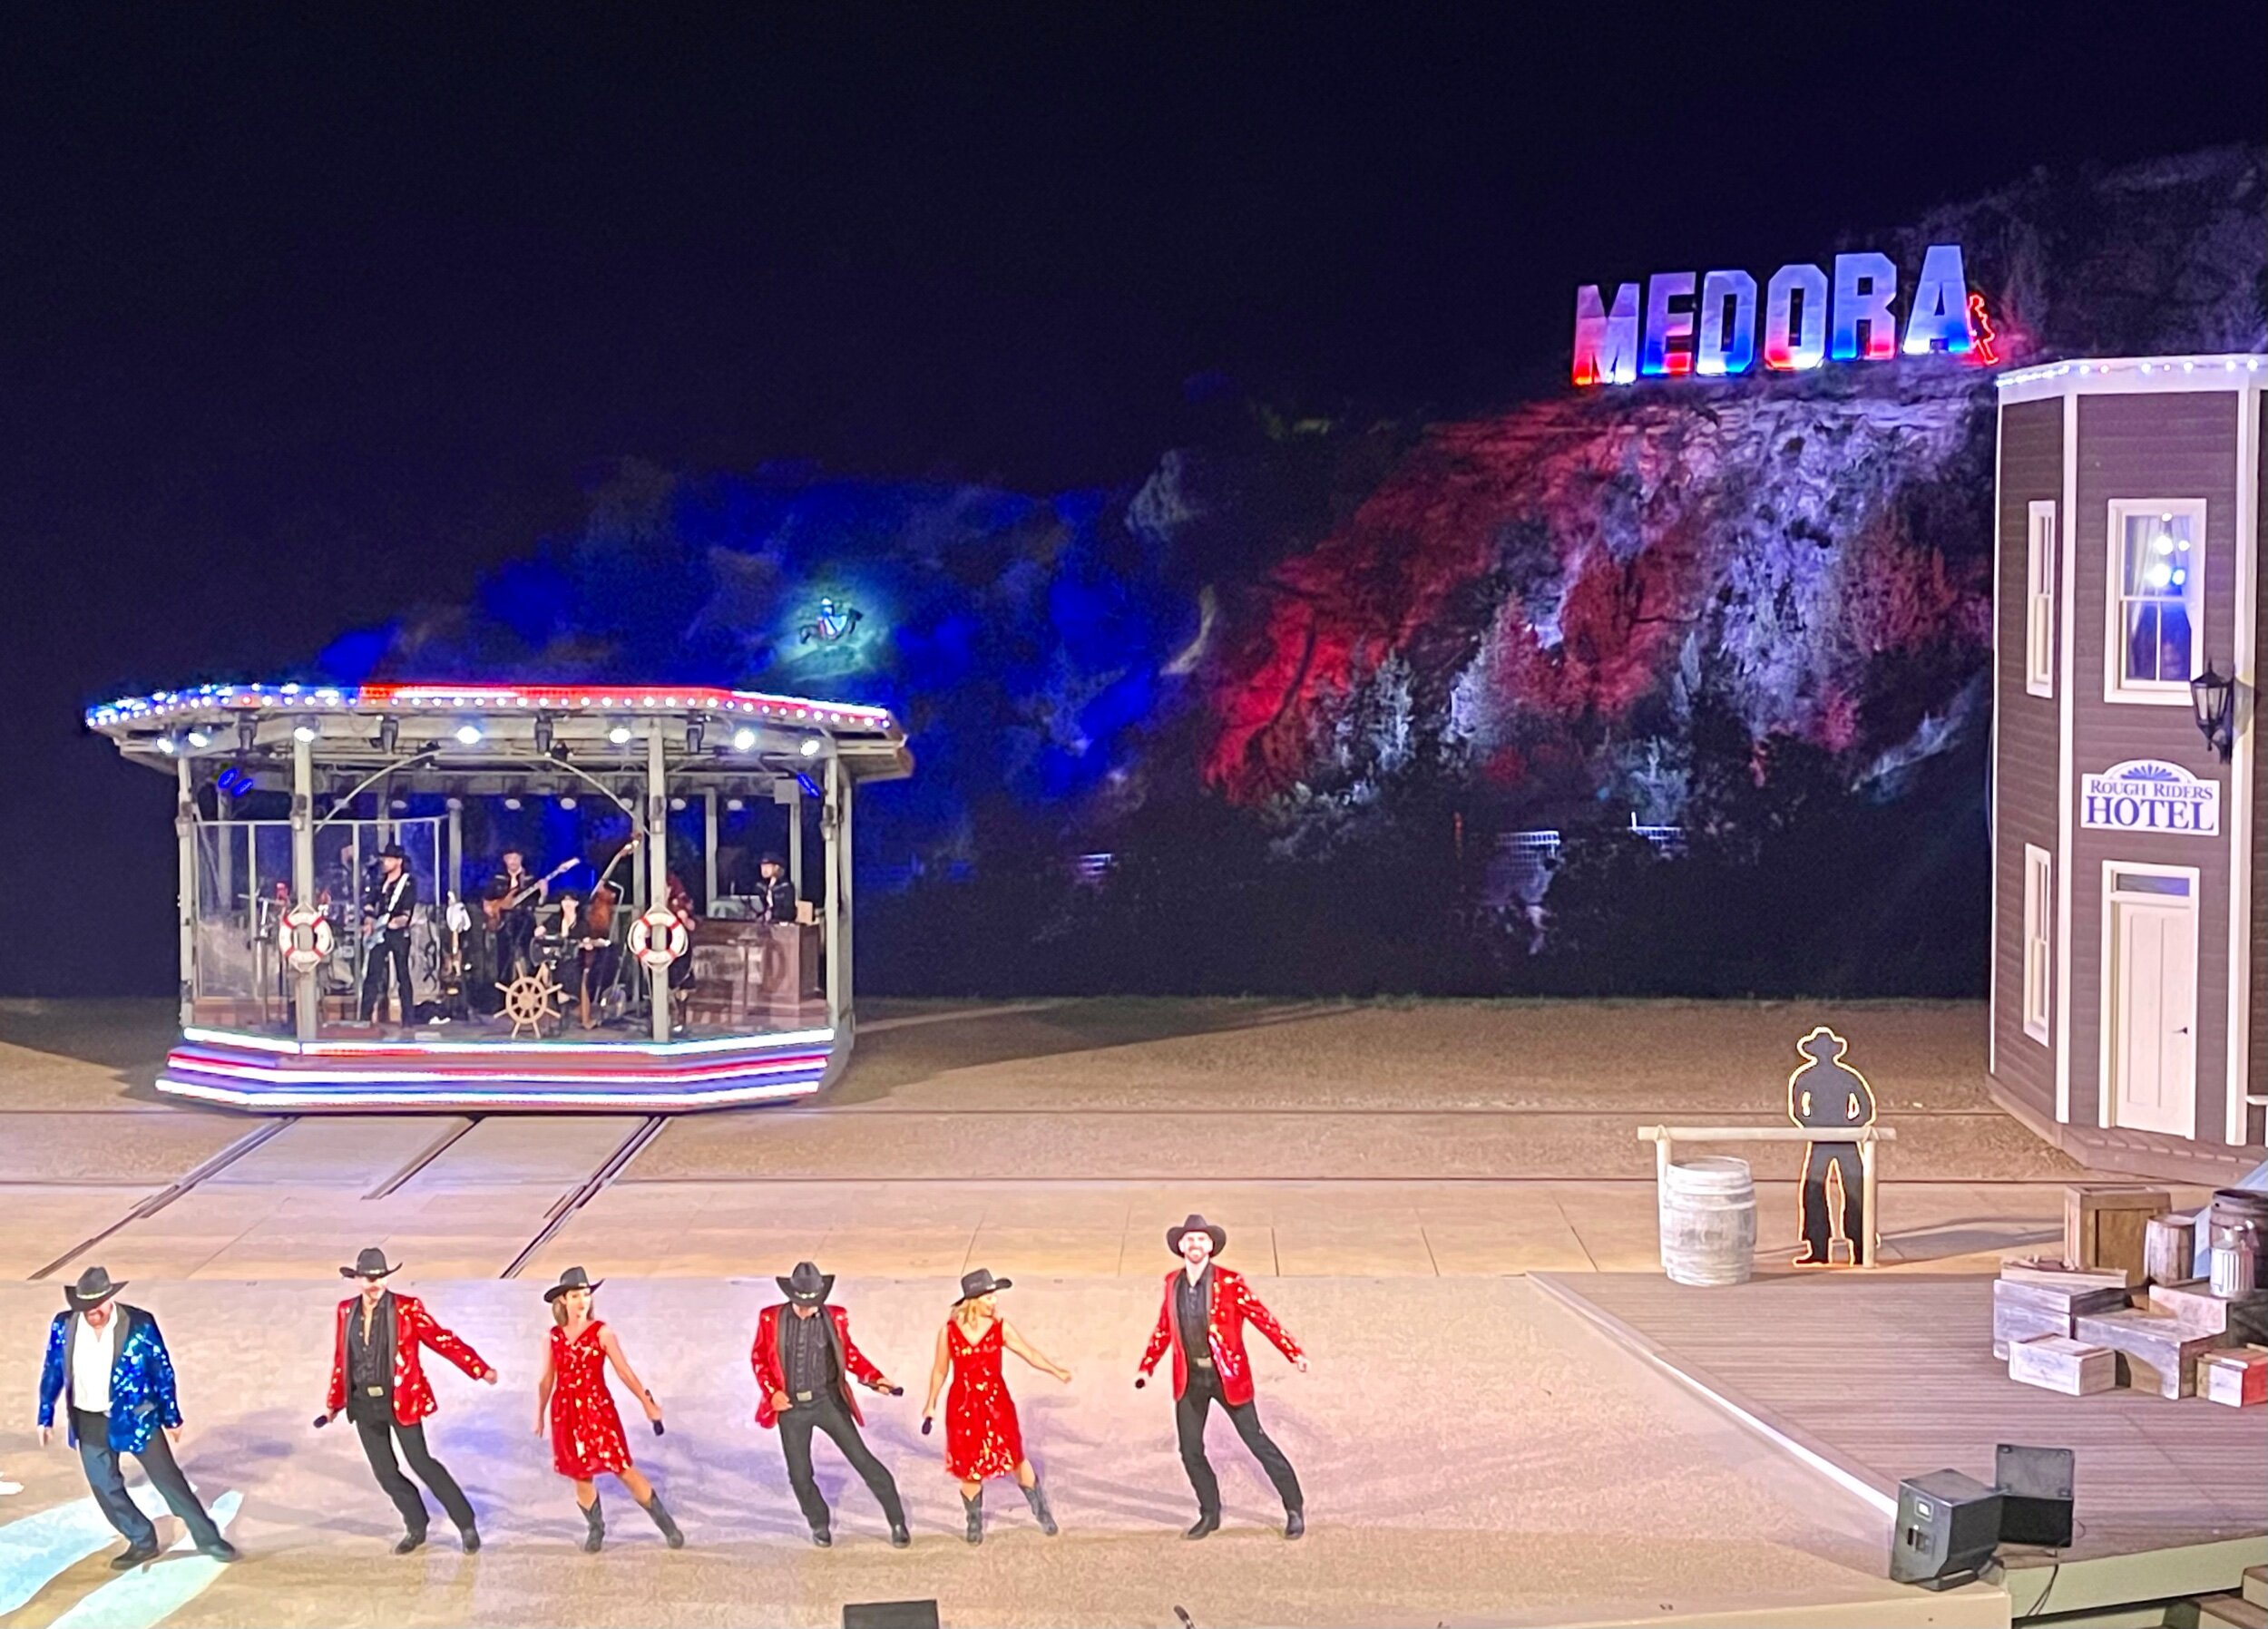  During the grand finale, a lone horse and its rider (spotlighted just above the smaller band stage in this photo) ascended an actual mountain behind the set to the top of the MEDORA sign. Meanwhile, the rest of the cast sang, played, and danced thei